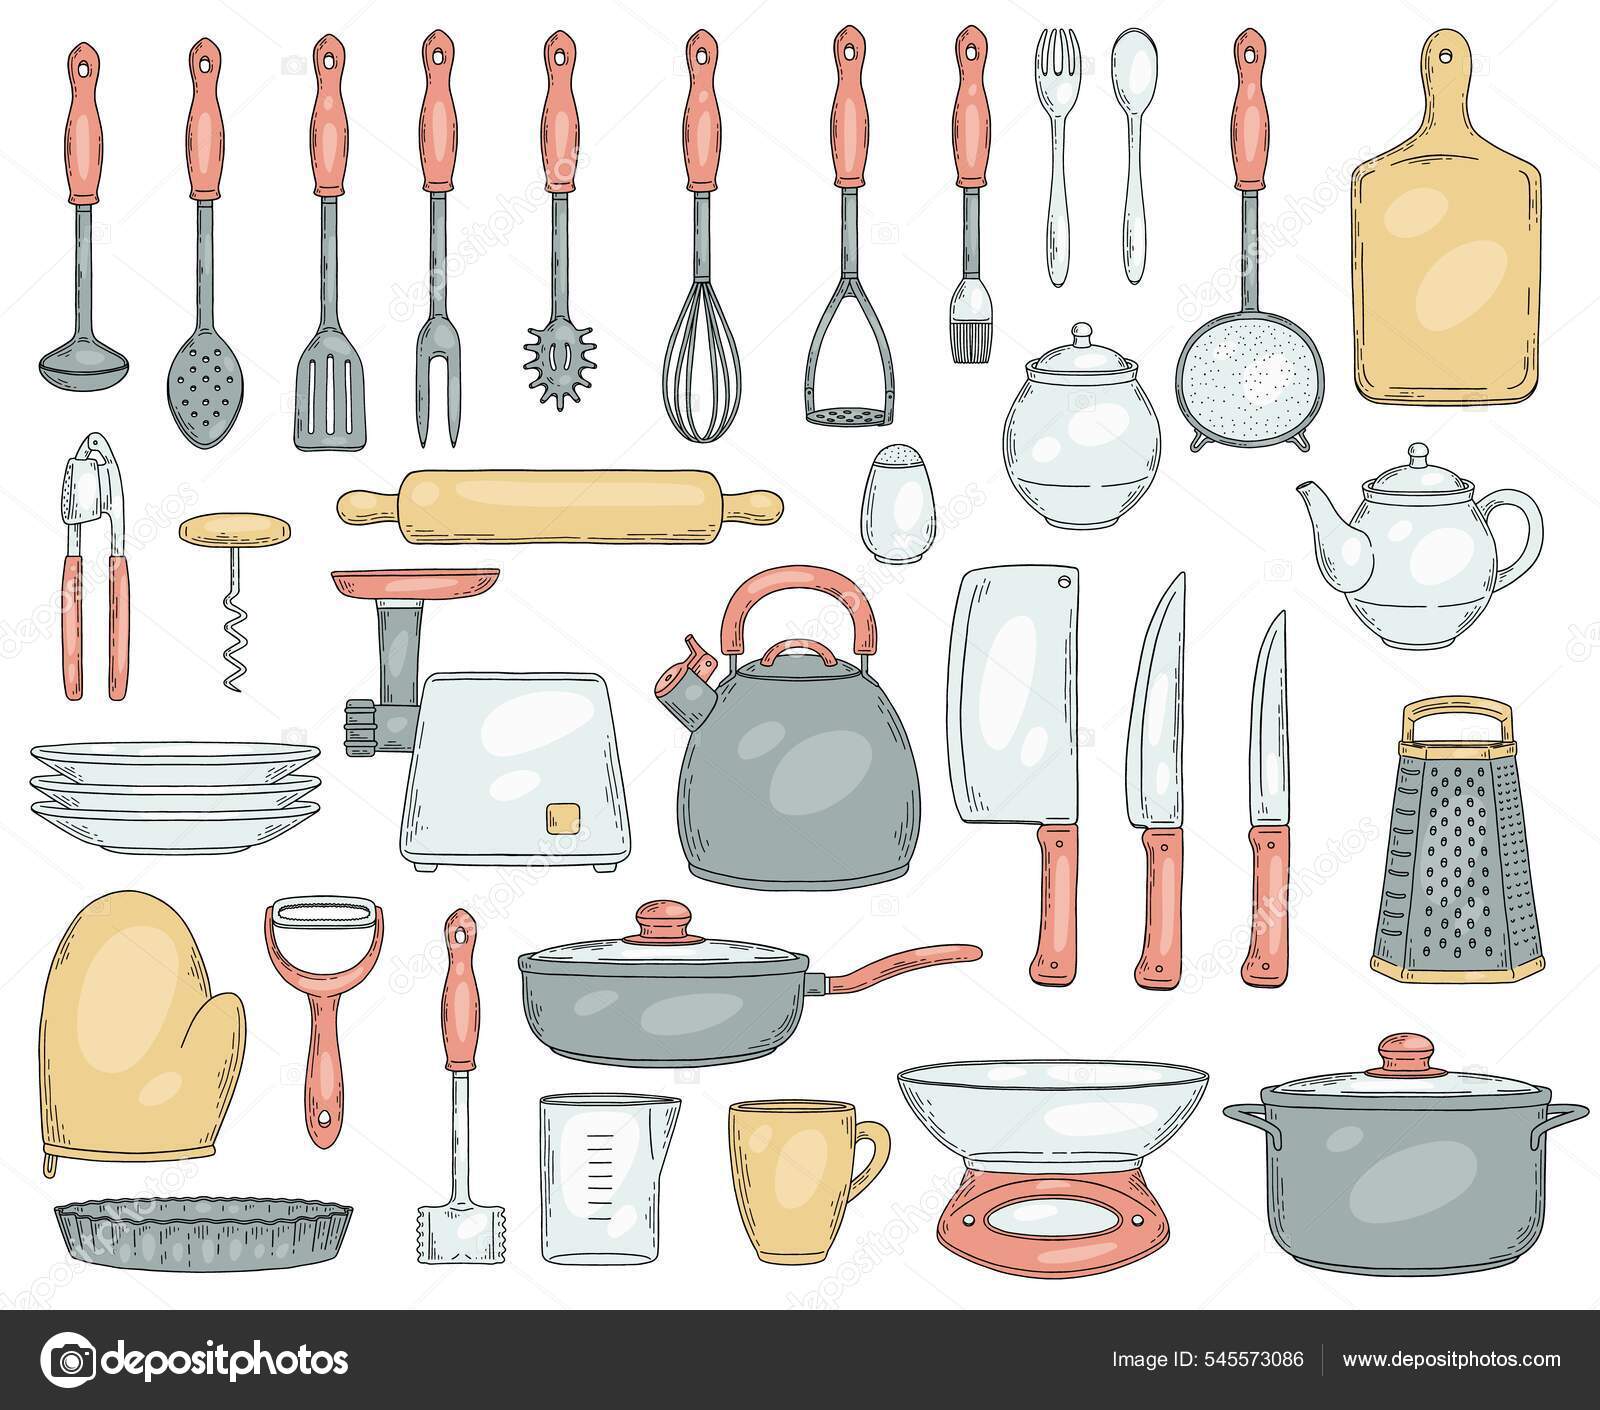 Utensils Kitchen Cooking Metal Chef Equipment Sketch Style Collection  Frying Pan And Saucepan Knife And Fork Spoon And Bowl Hand Drawn Home And  Restaurant Kitchenware Vector Isolated Set Stock Illustration - Download